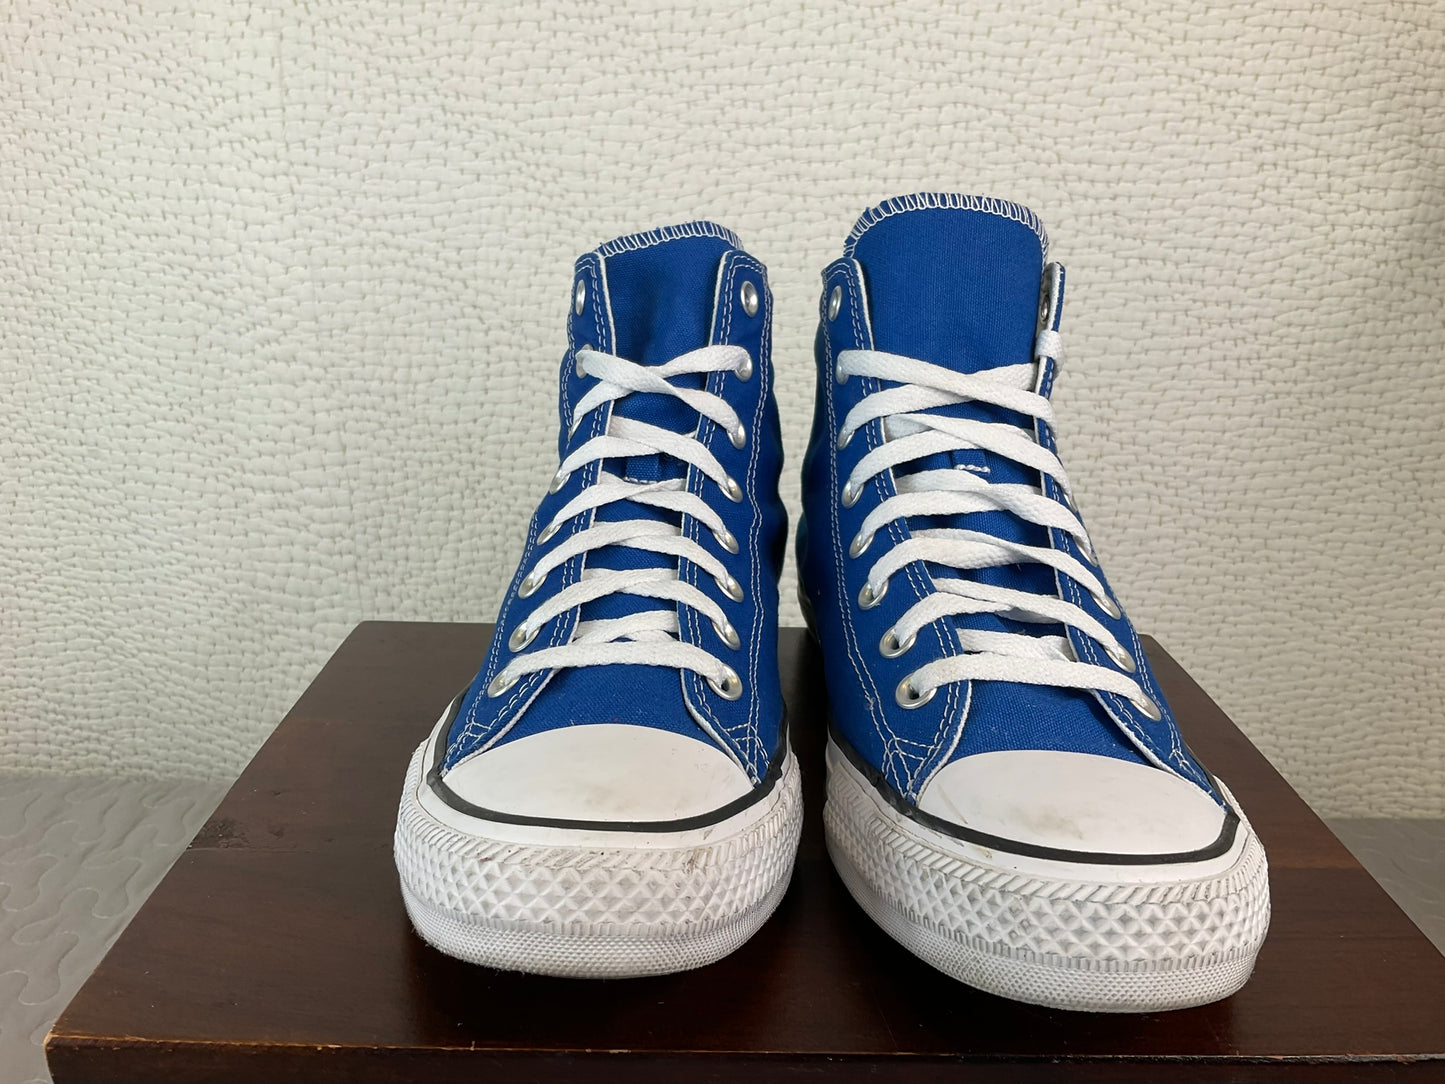 Converse Chuck Taylor All Star High Tops, Size M 9.5/ W 11.5